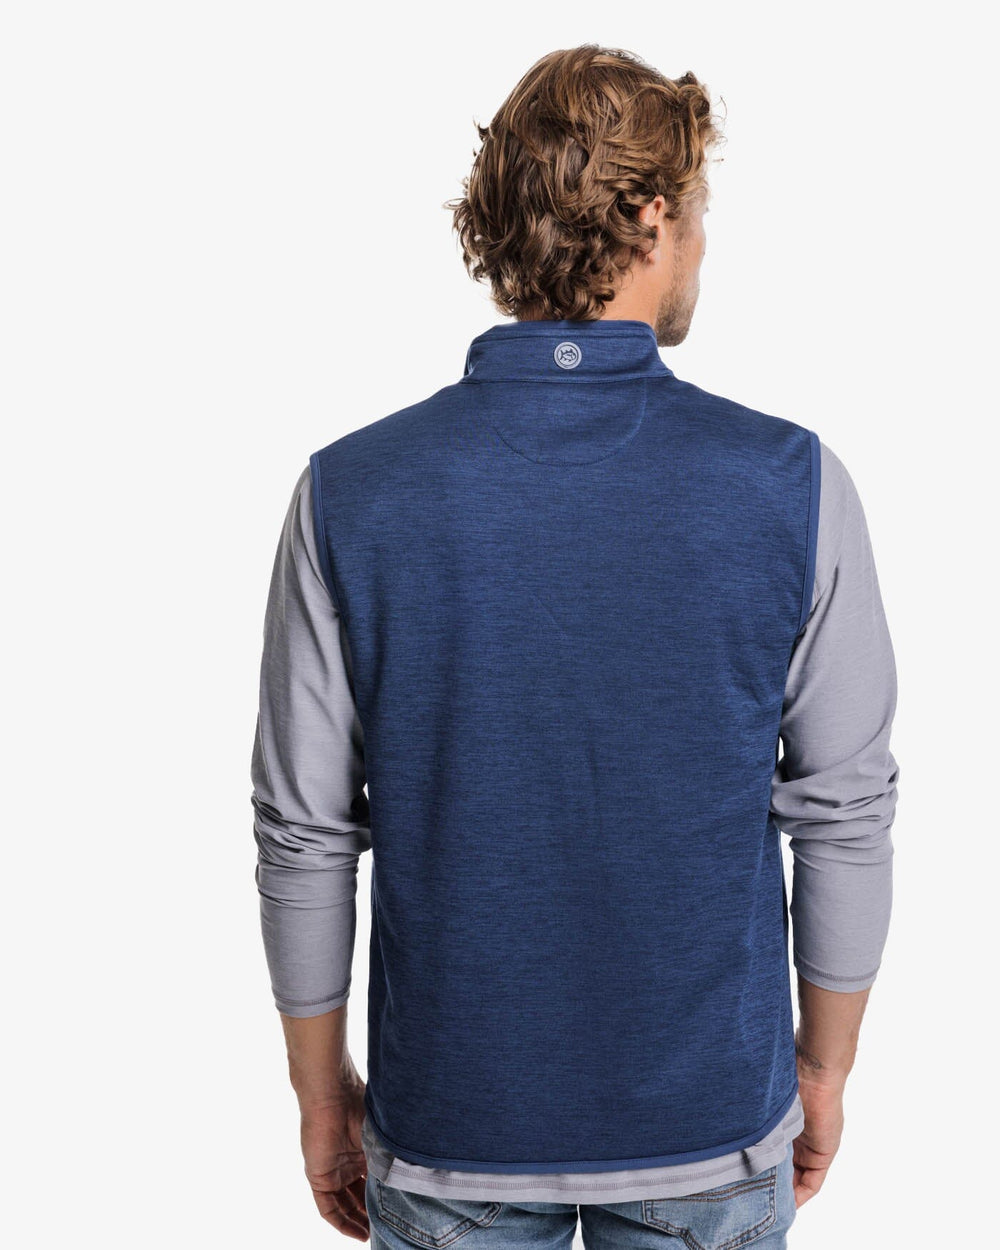 The back view of the Southern Tide Baybrook Heather Vest by Southern Tide - Heather Navy